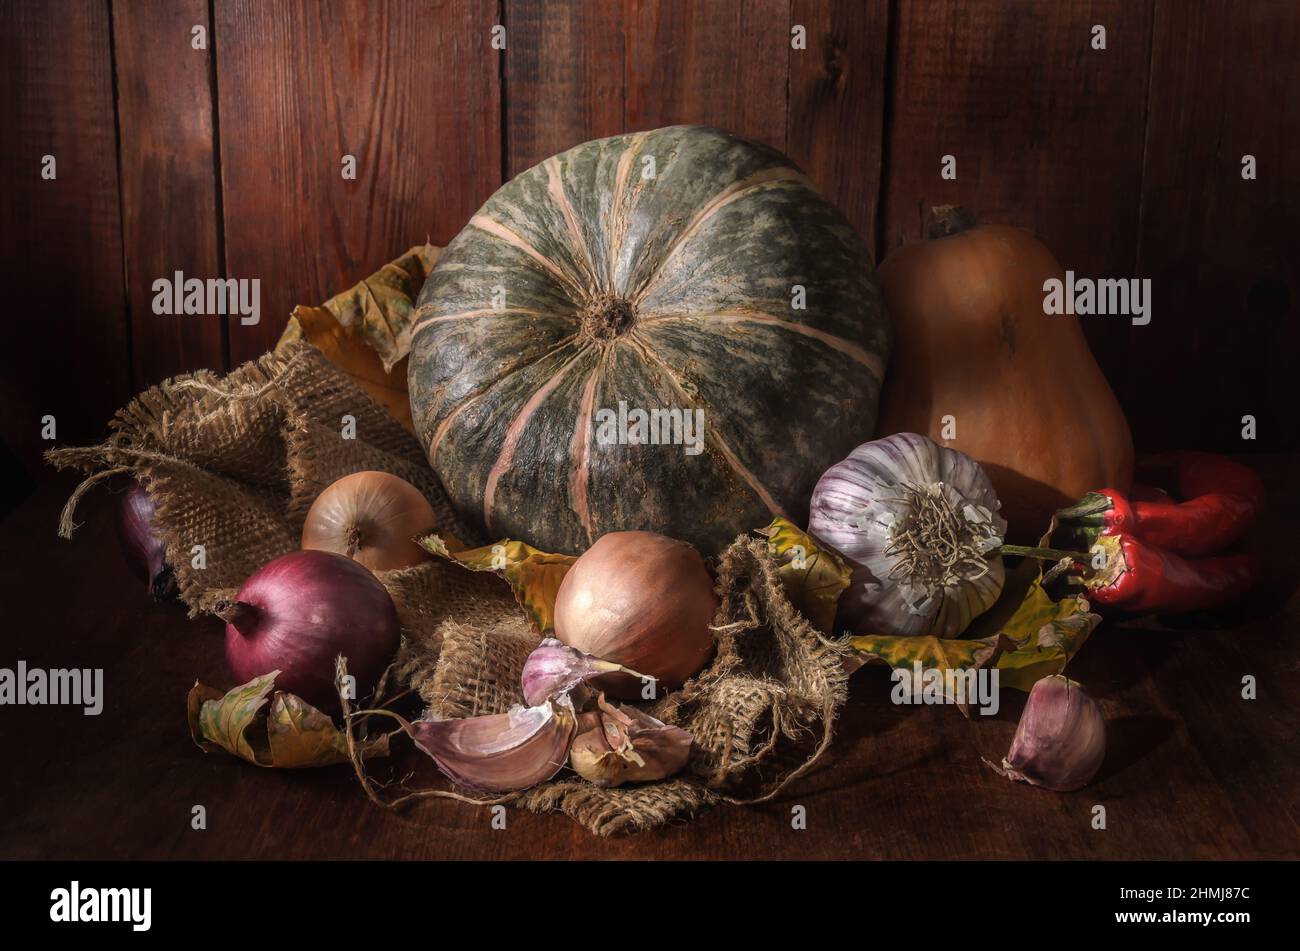 Pumpkin and other vegetables on dark wooden background Stock Photo